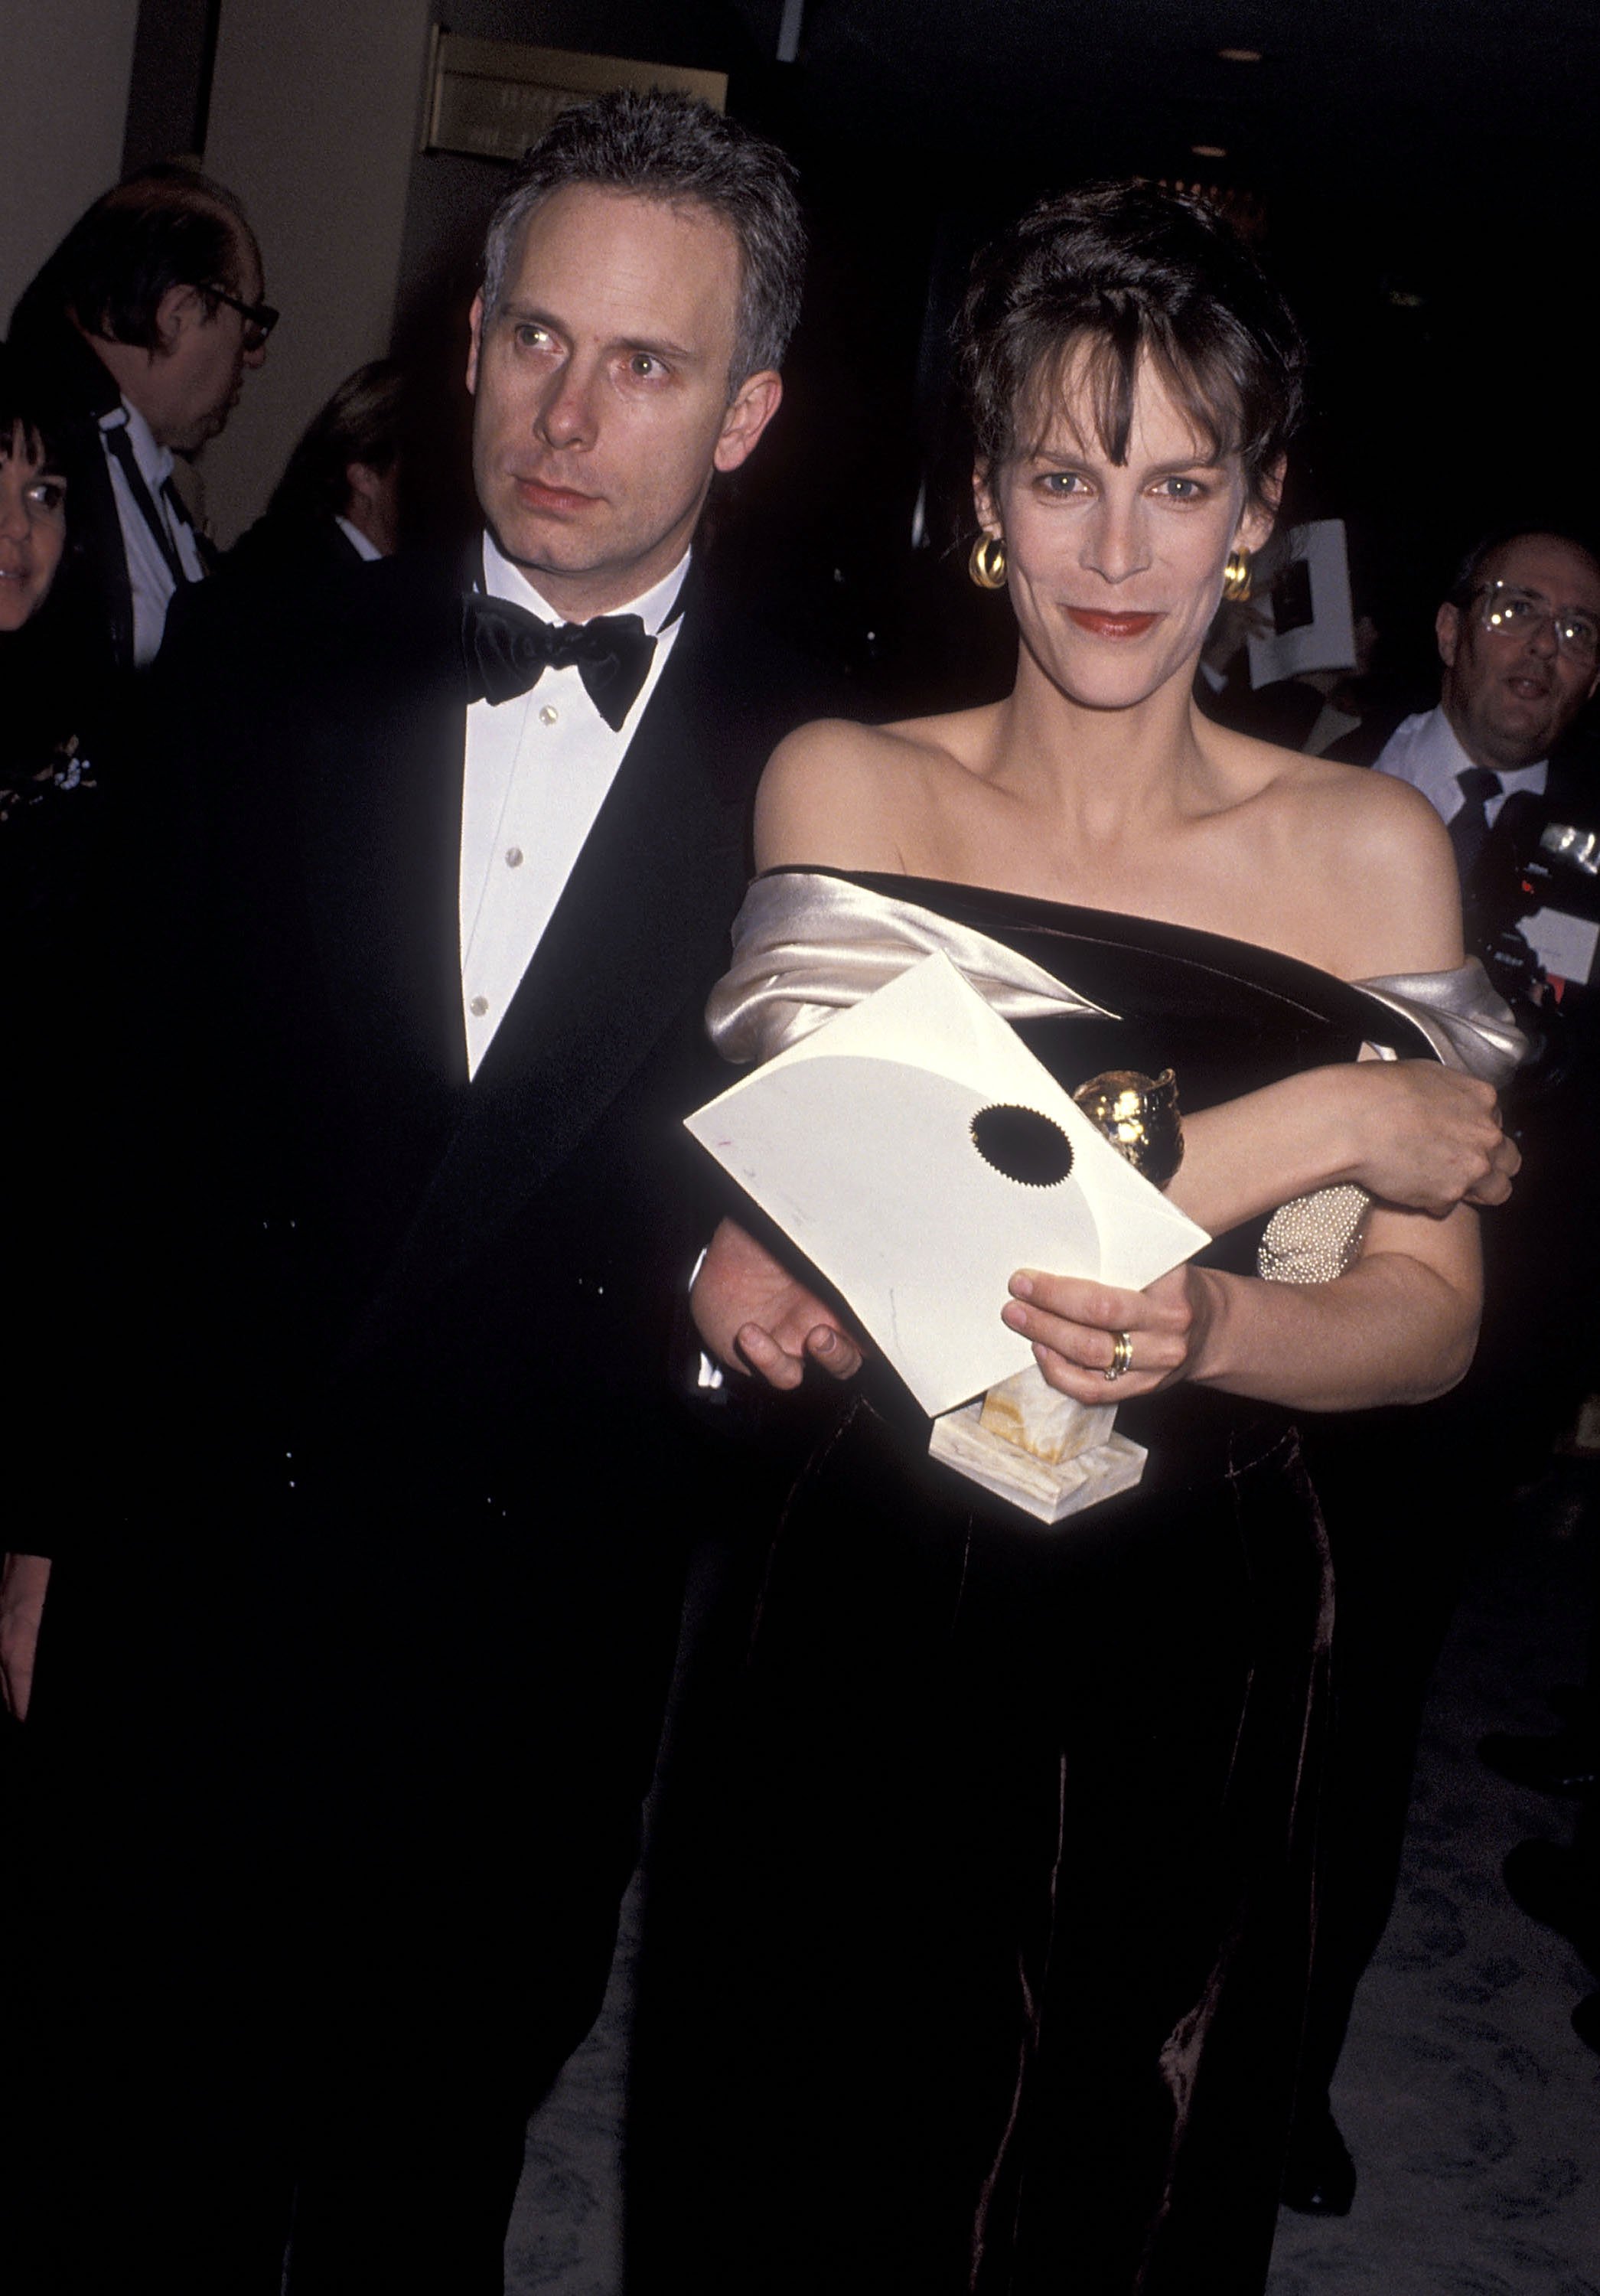  Actor/Writer Christopher Guest and actress Jamie Lee Curtis attend the 47th Annual Golden Globe Awards on January 20, 1990 at Beverly Hilton Hotel in Beverly Hills, California. | Source: Getty Images